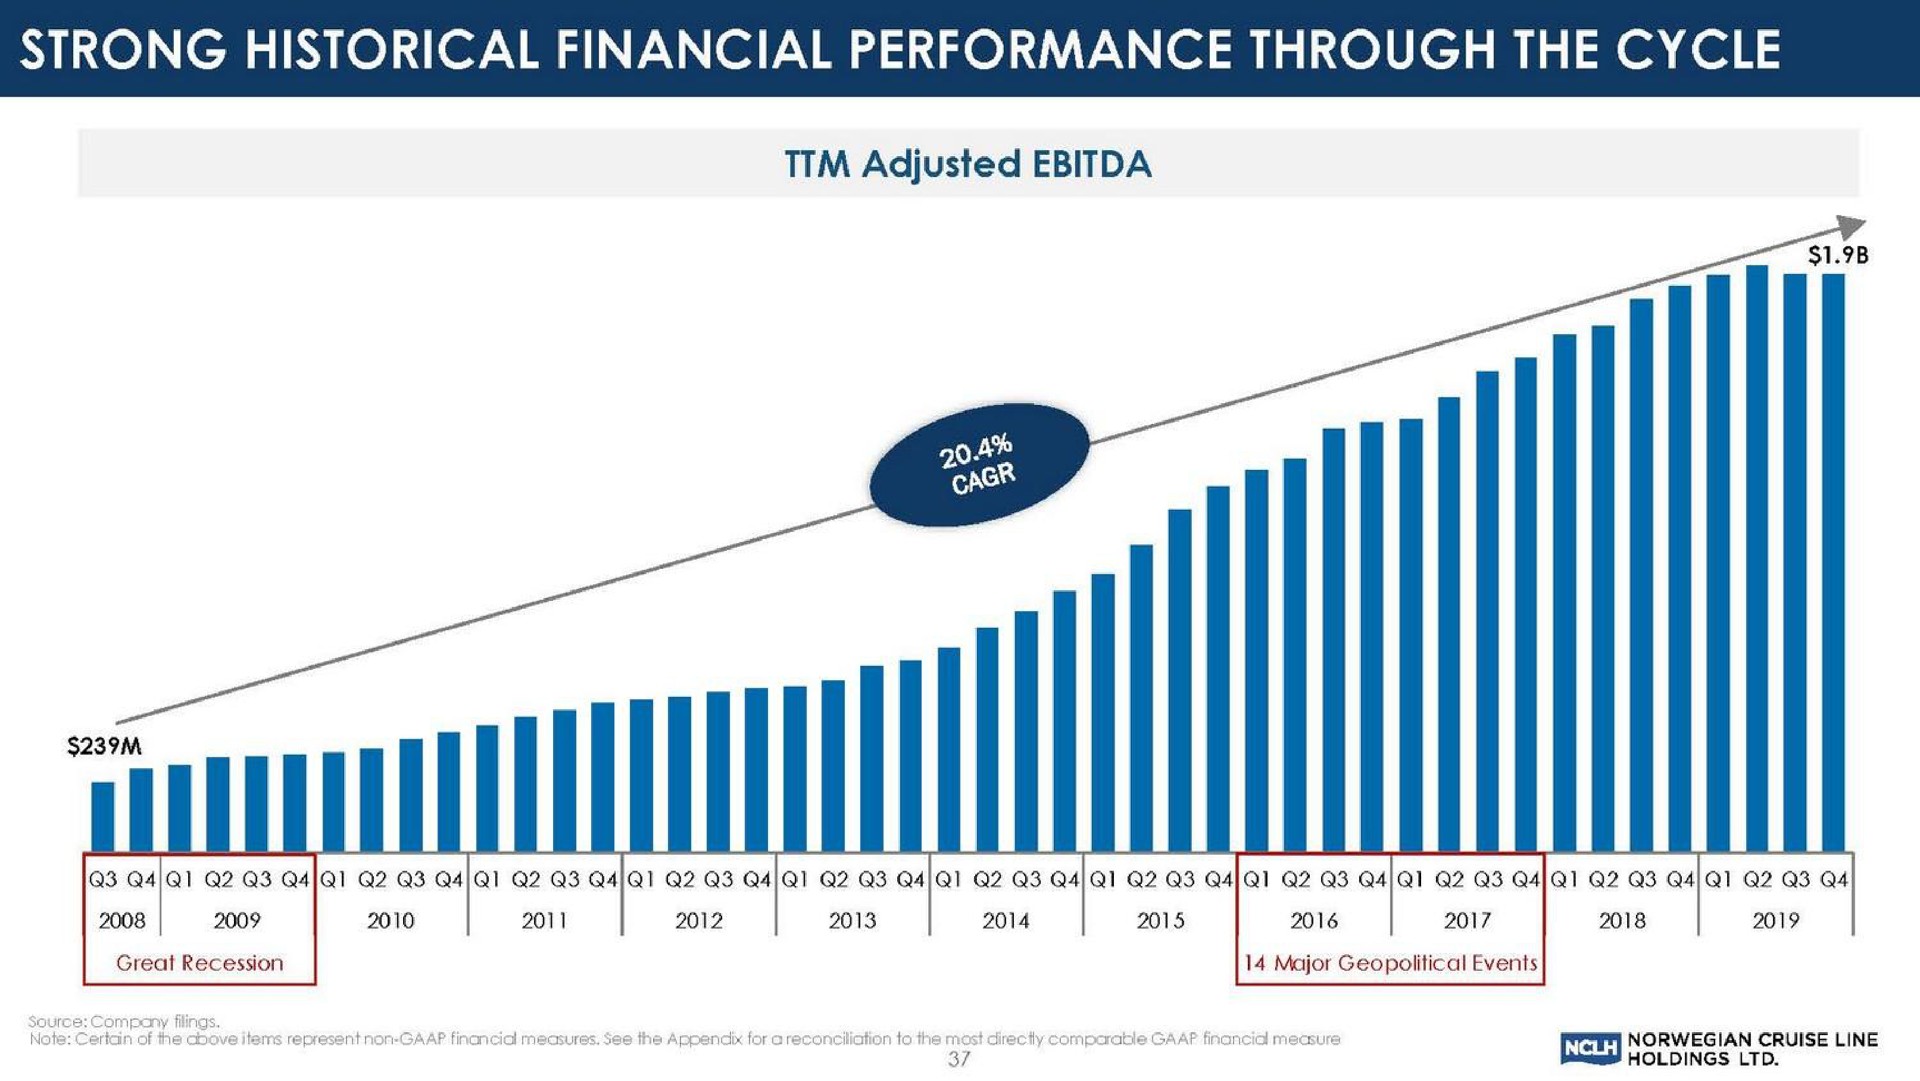 strong historical financial performance through the cycle | Norwegian Cruise Line